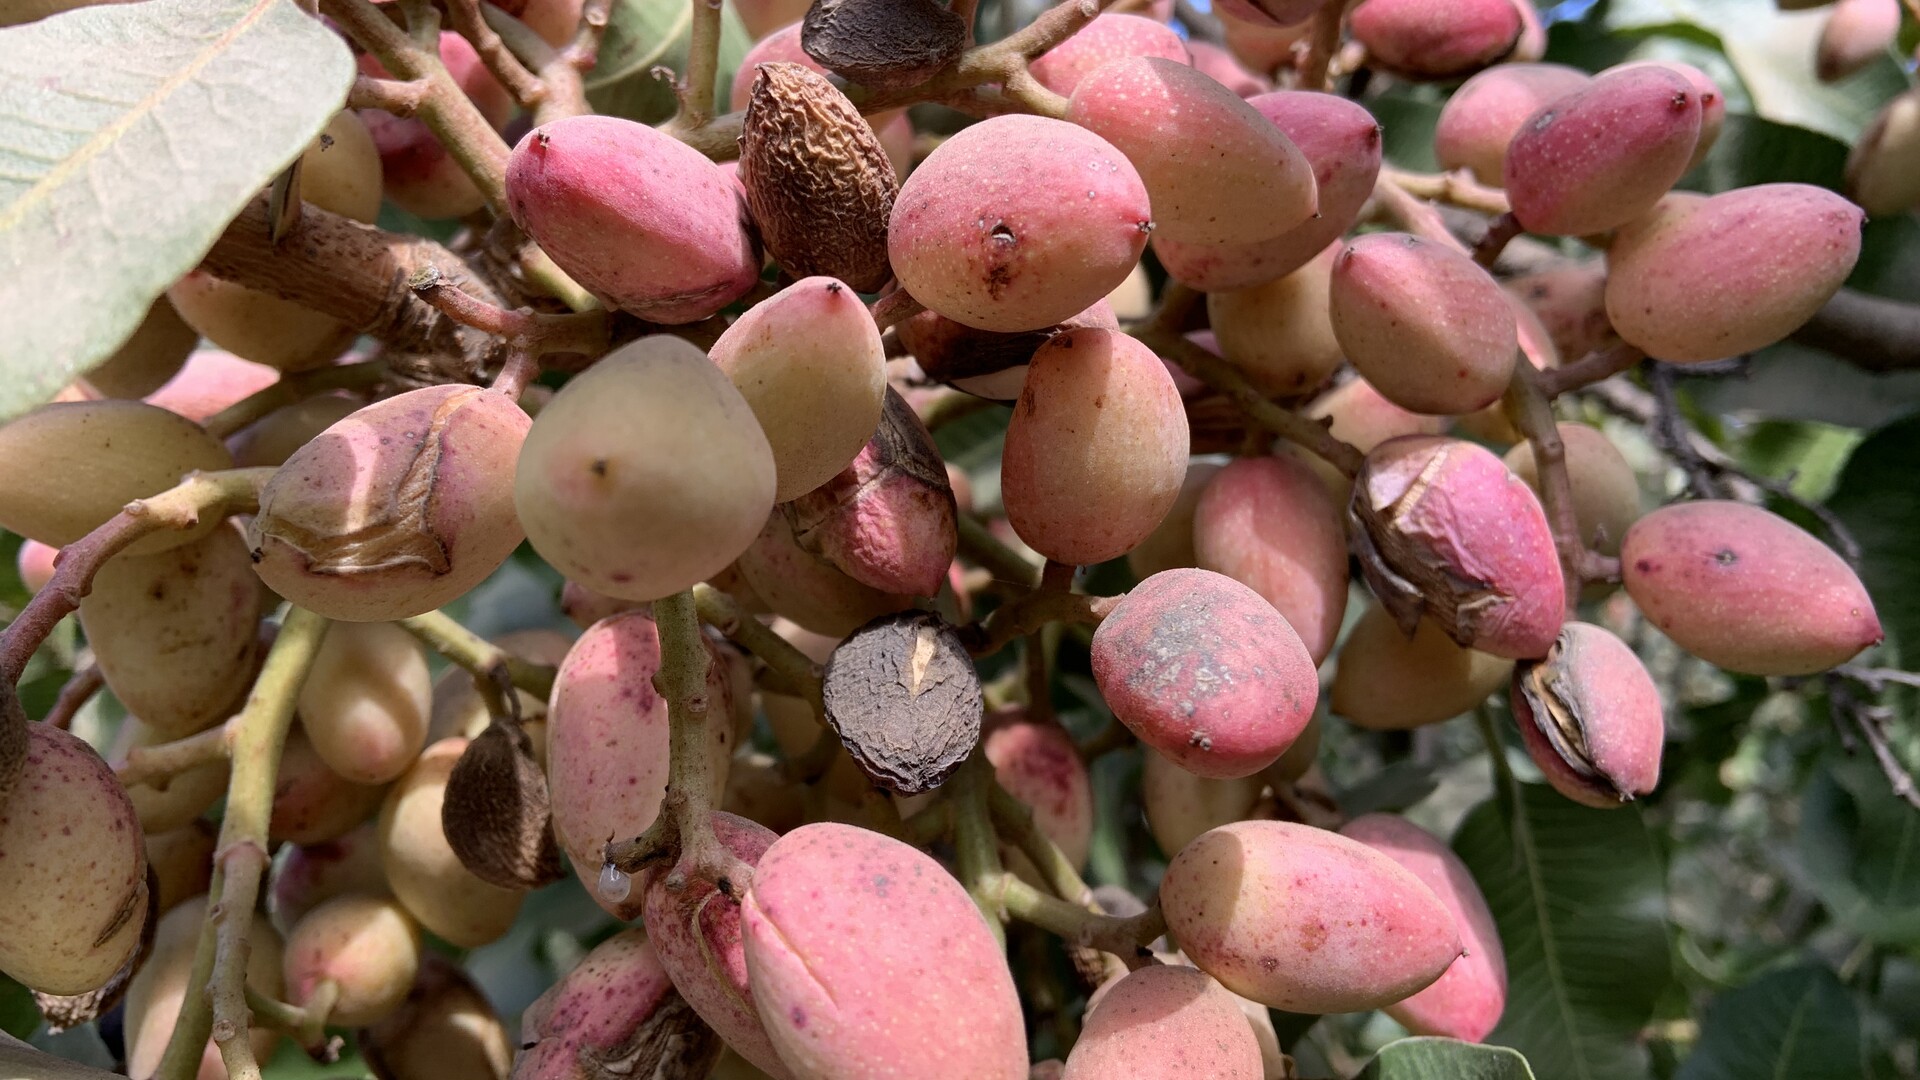 Pistachios Are a Newer Crop in California